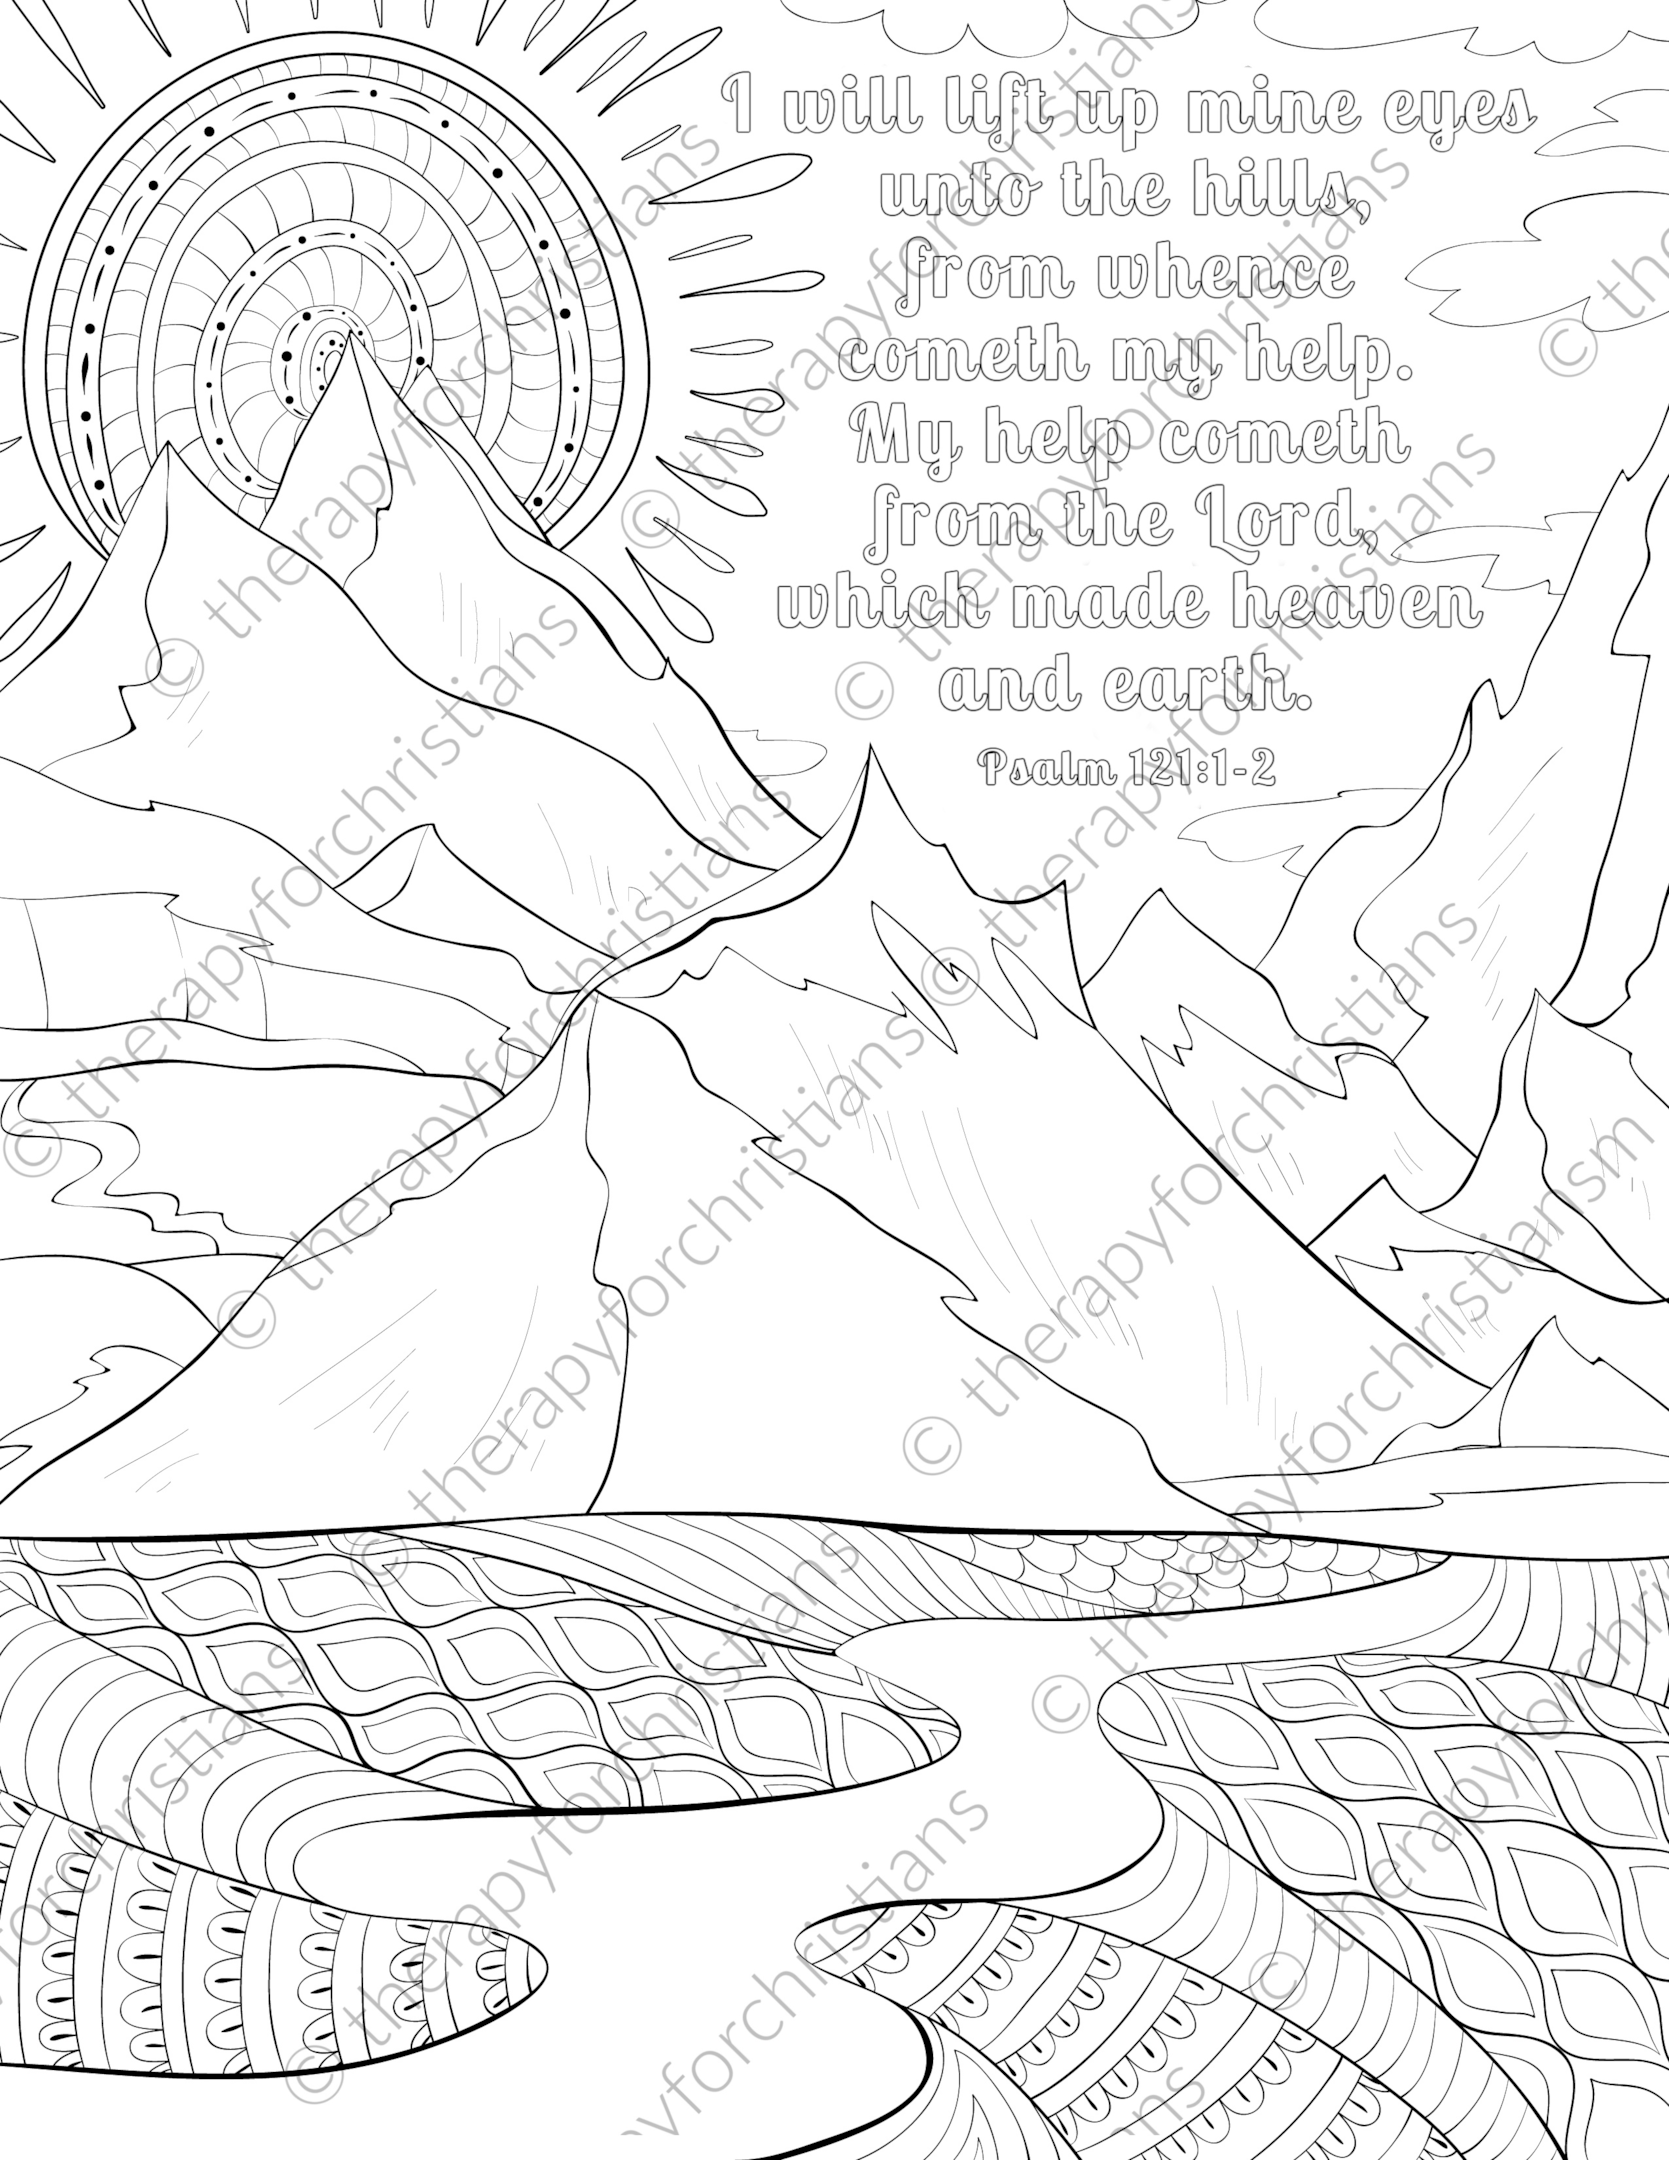 Psalm 121:1-2 Coloring pages for adults 